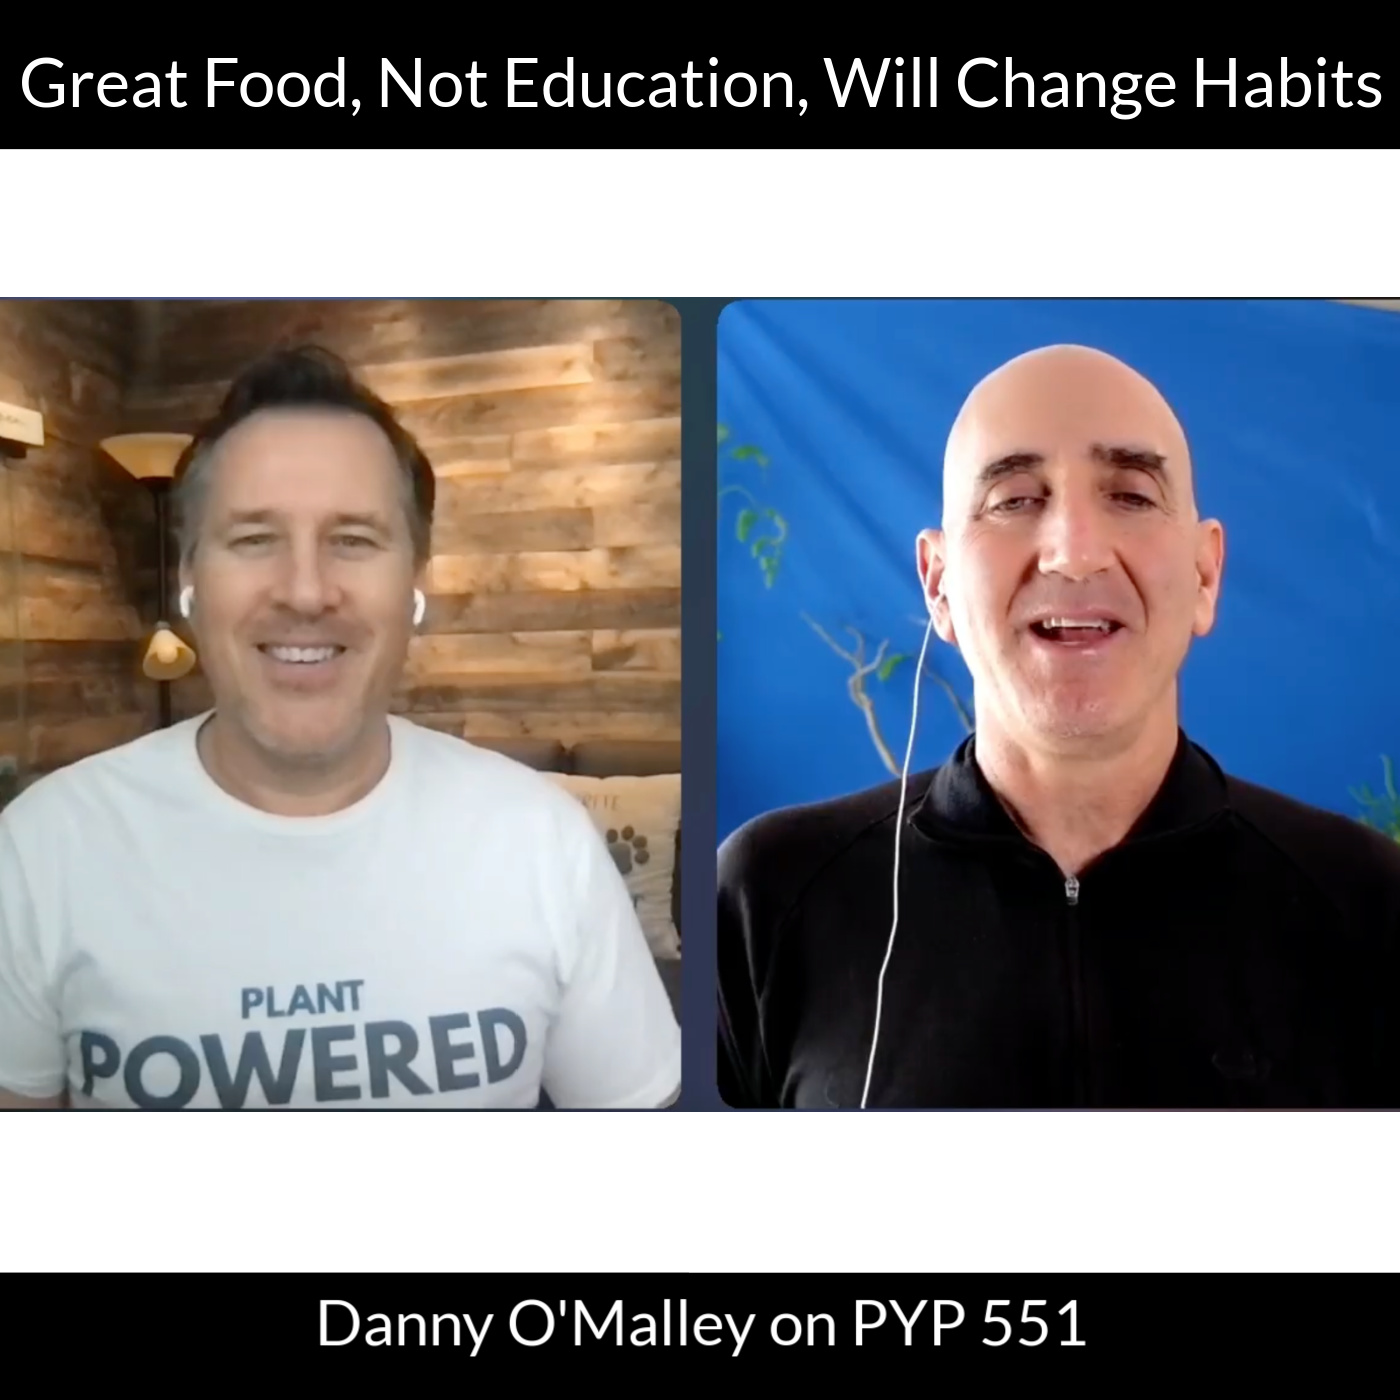 Great Food, Not Education, Will Change Habits: Danny O’Malley on PYP 551